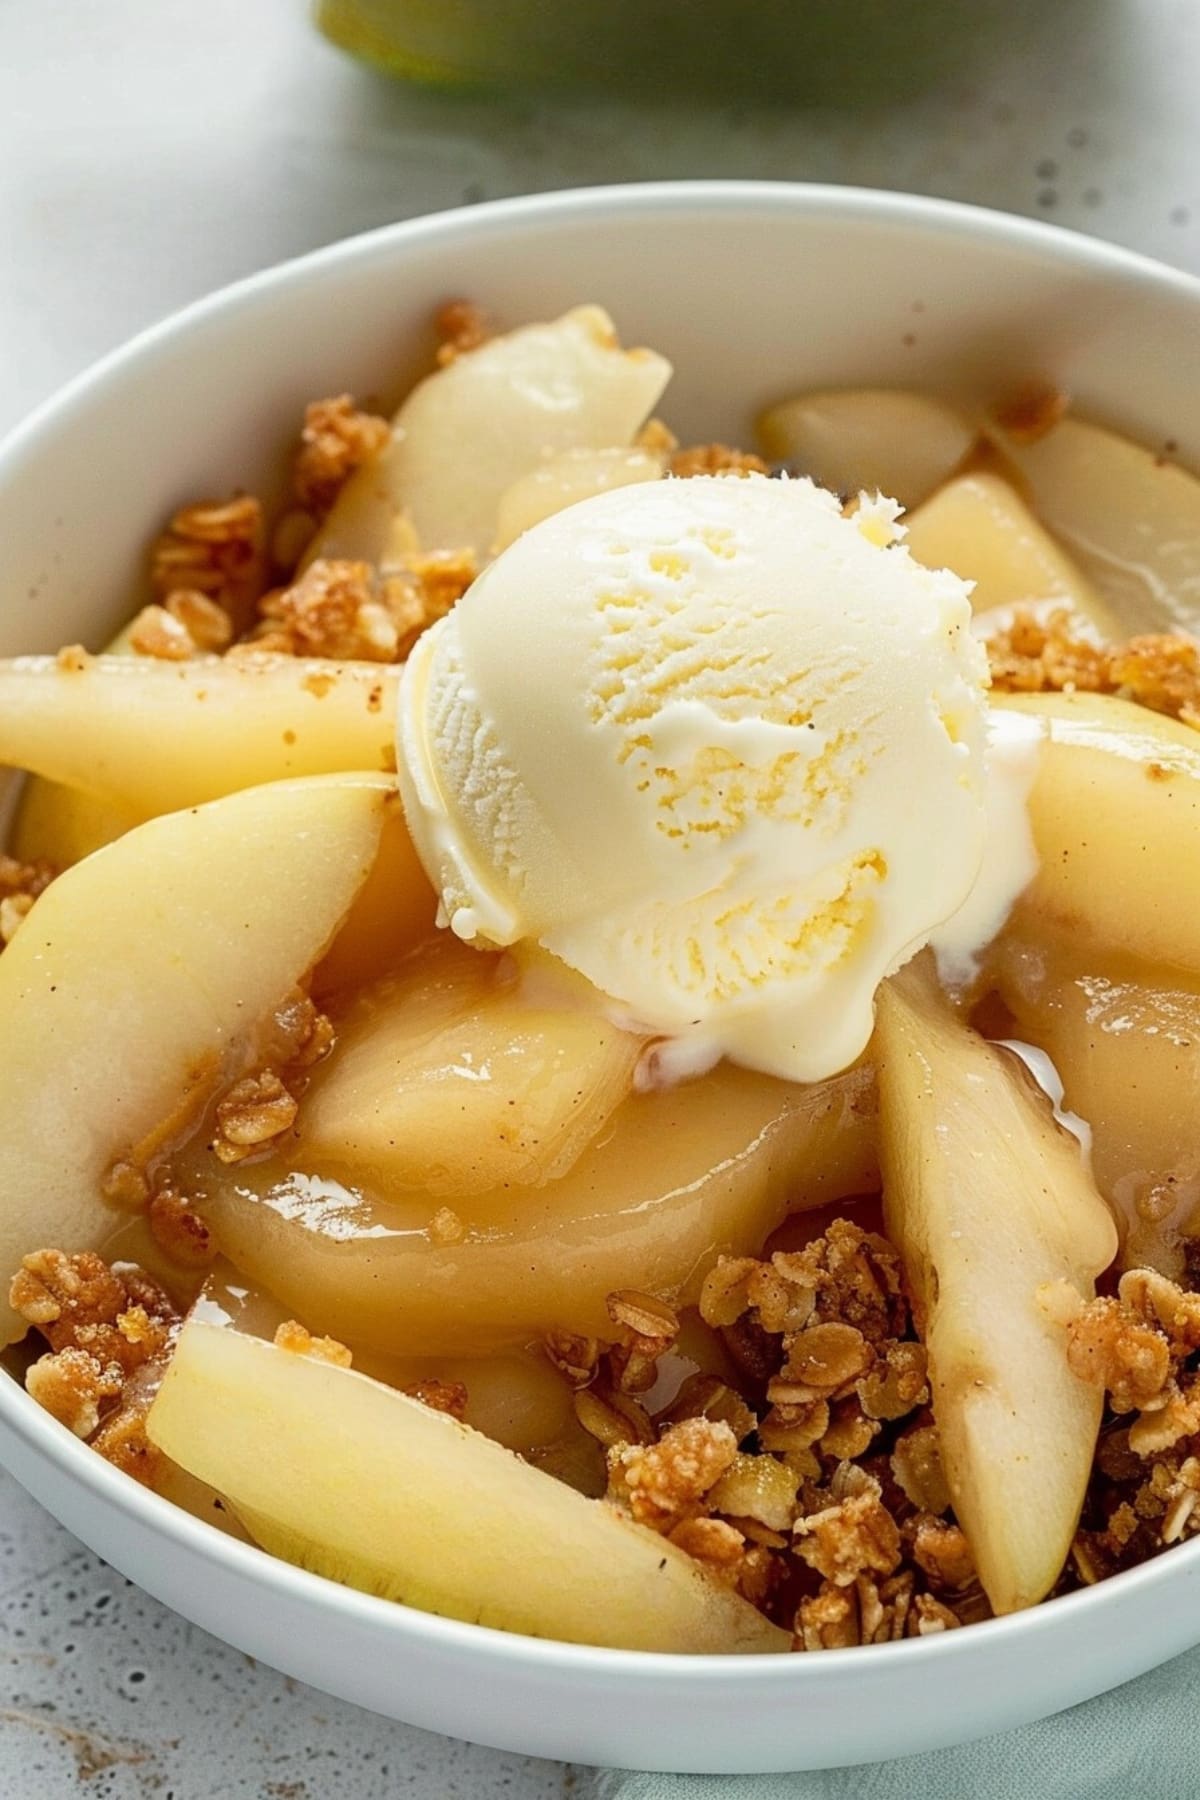 Baked pear crisp in a white bowl garnished with vanilla ice cream.